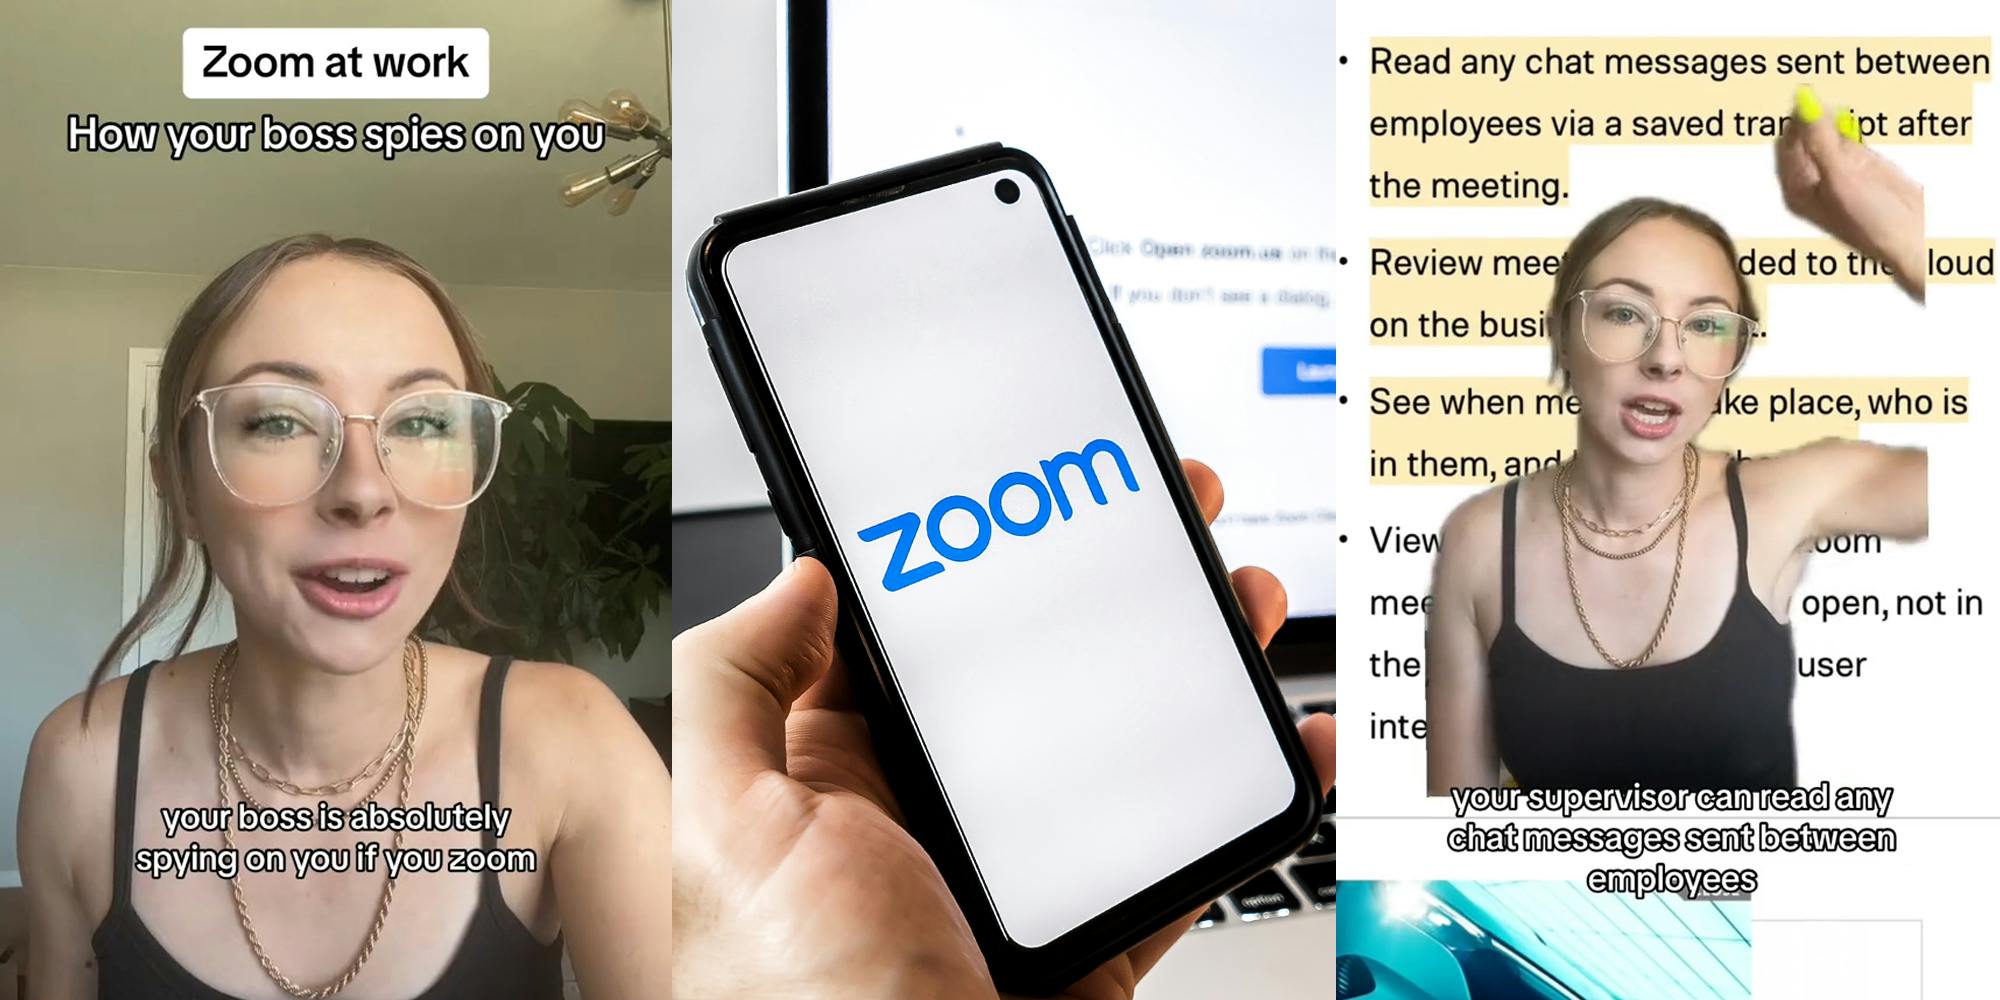 worker speaking with caption "Zoom at work How you boss spies on you your boss is absolutely spying on you if you use Zoom" (l) hand holding phone with Zoom on screen in front of laptop (c) worker greenscreen TikTok over Zoom list with caption "your supervisor can read any chat messages sent between employees" (r)